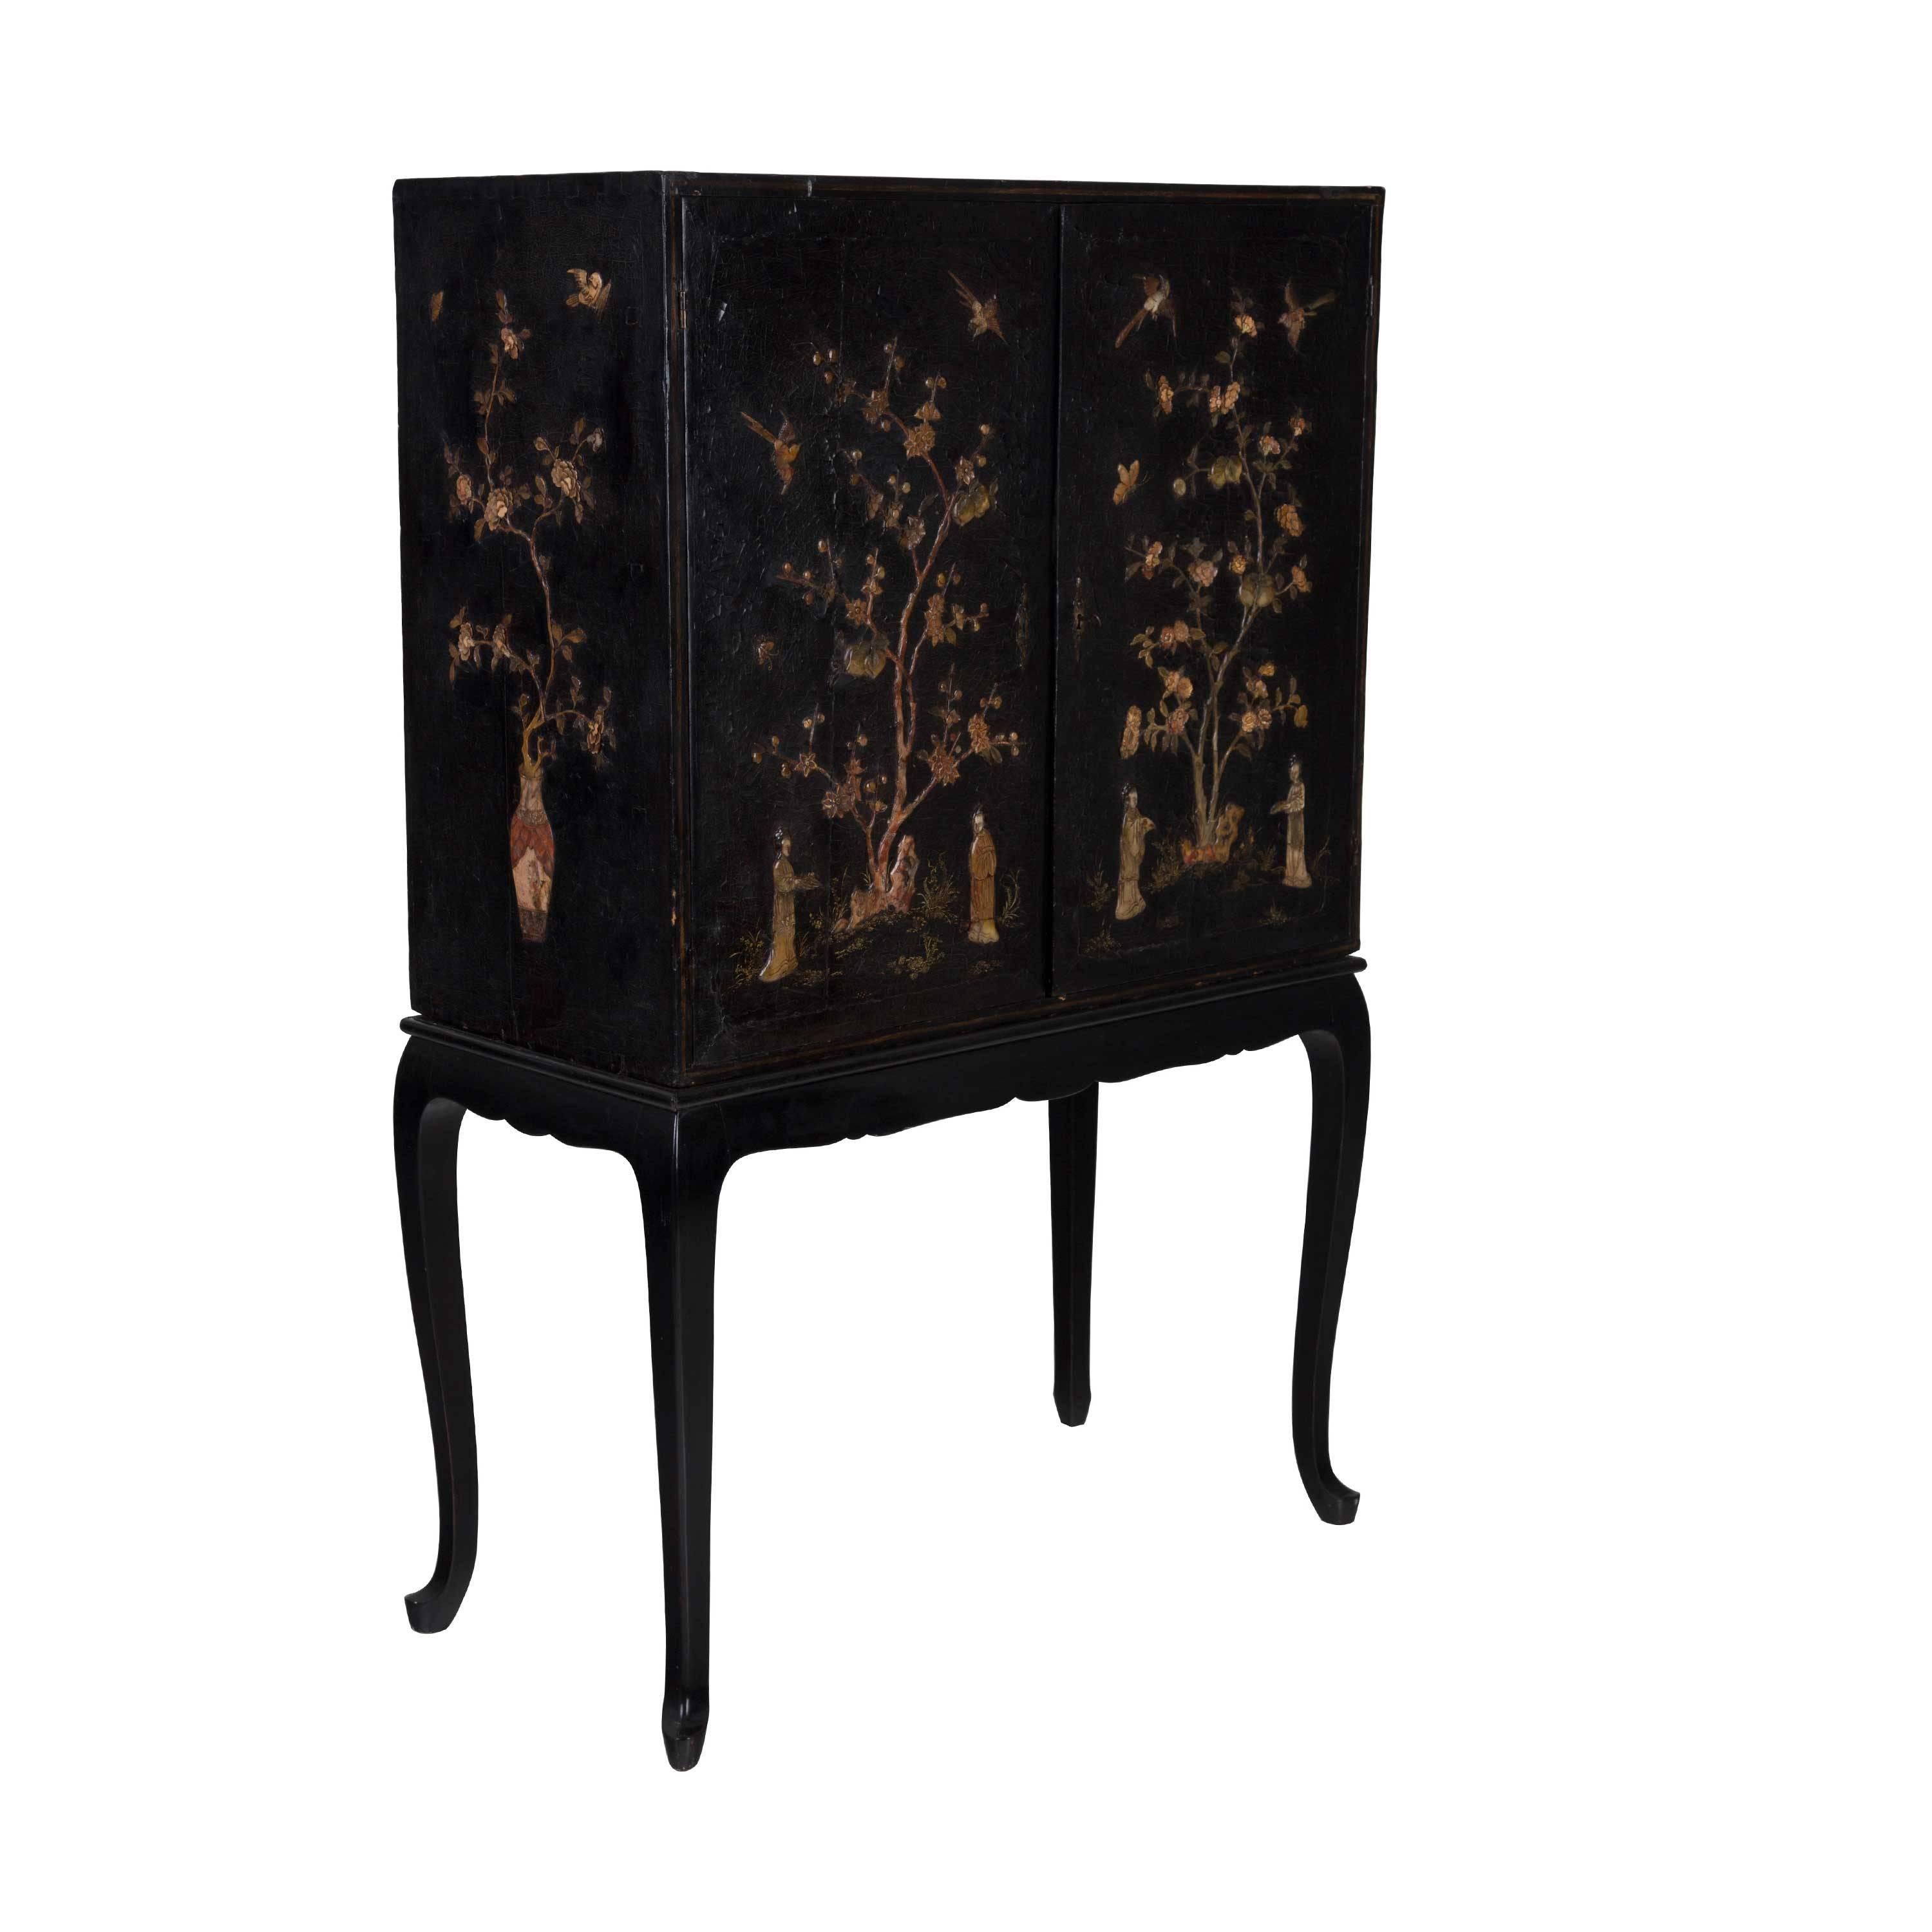 Fine late 19th century soapstone decorated Chinese cabinet on stand, circa 1880.